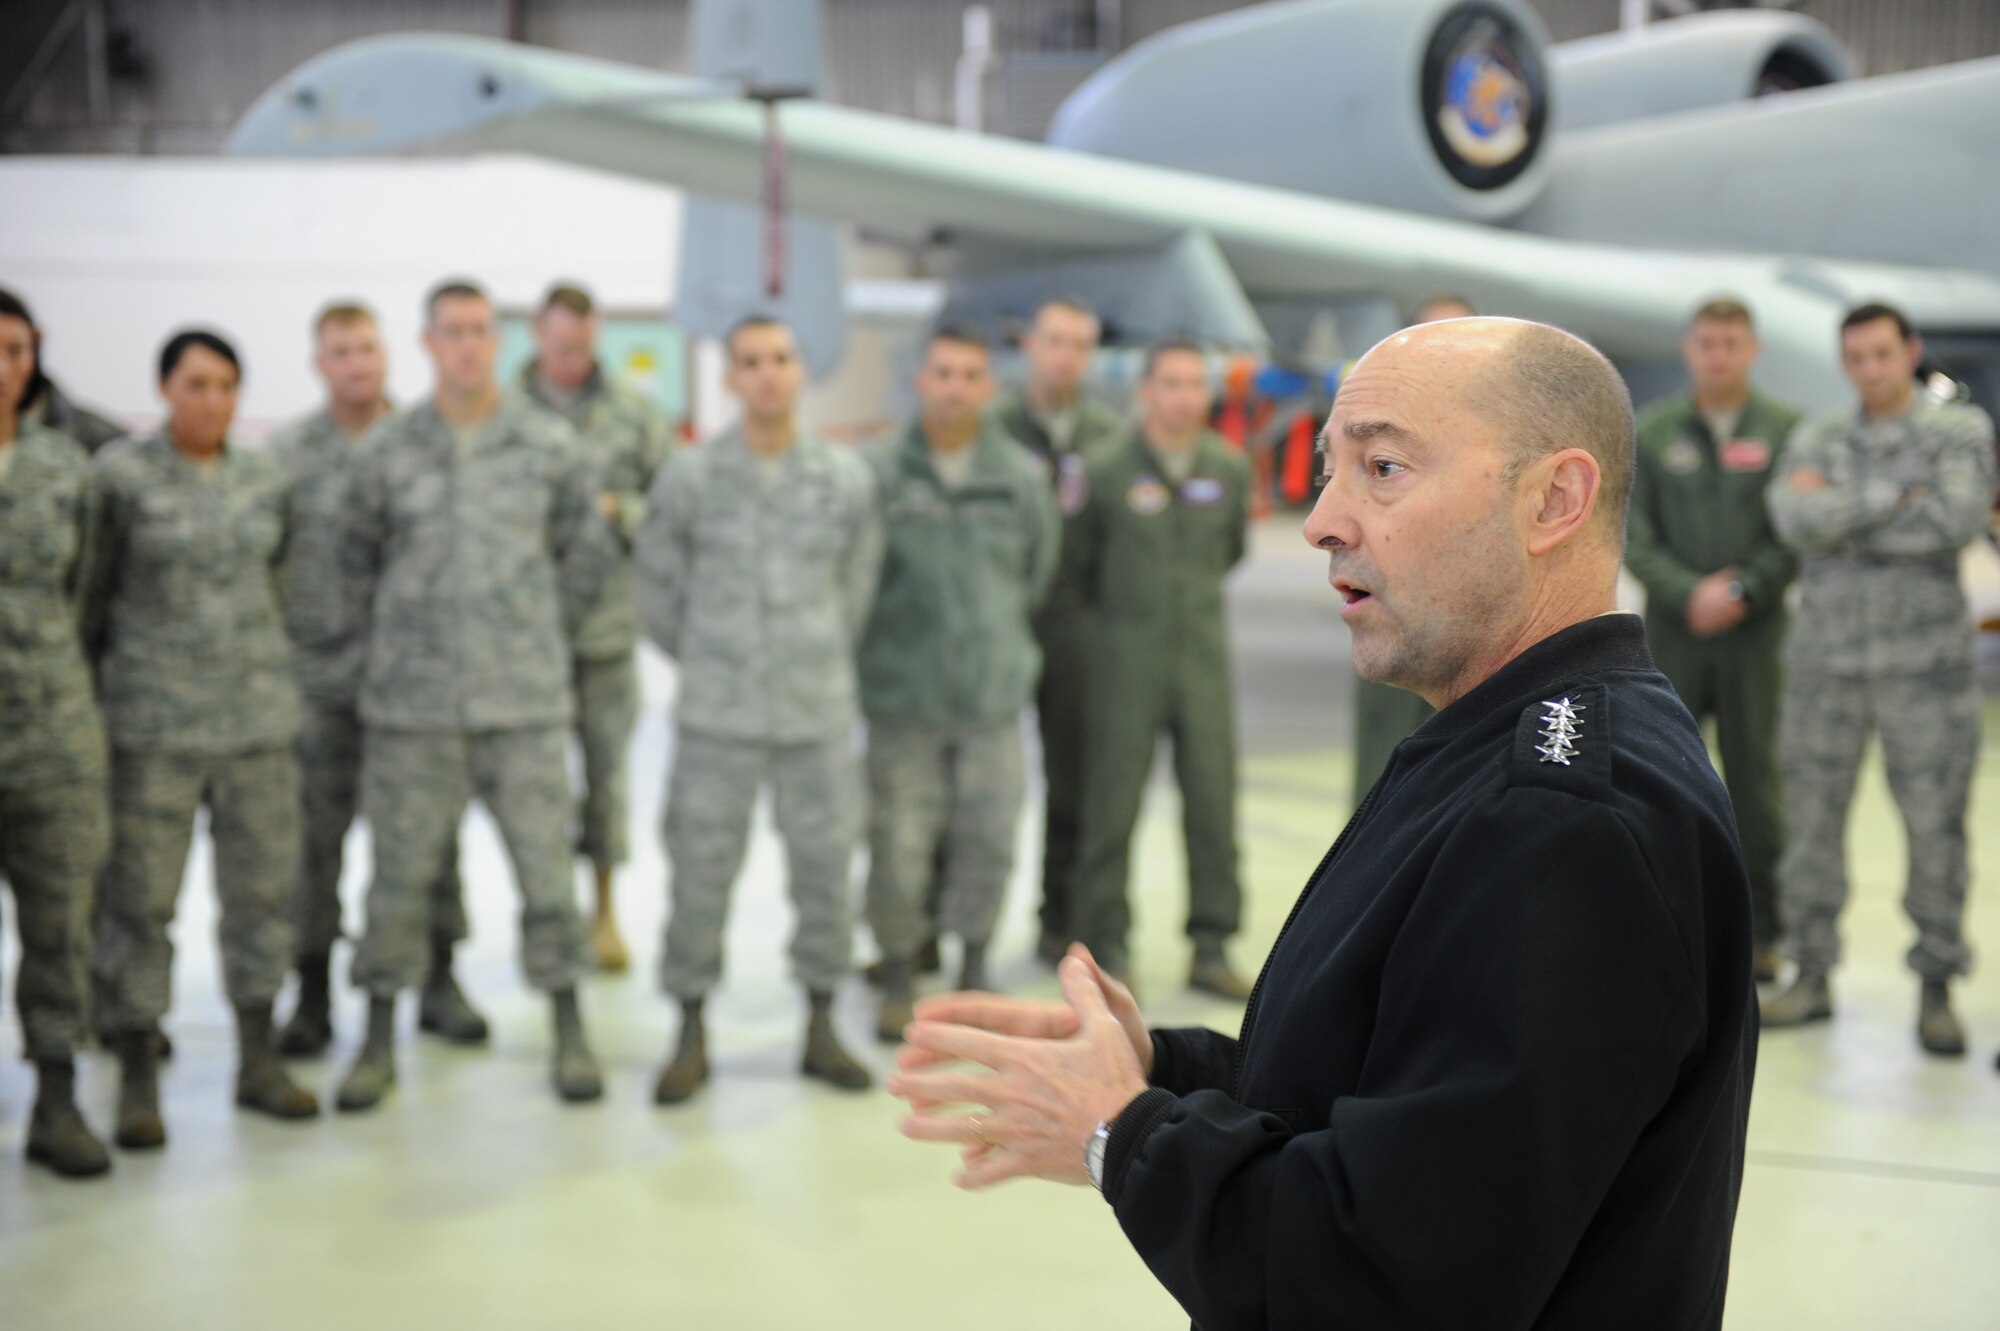 SPANGDAHLEM AIR BASE, Germany -- U.S. Navy Adm. Jim Stavridis, U.S. European Command commander and NATO Supreme Allied Commander Europe, visited with Airmen in Hangar 1 here Dec. 14 as part of a familiarization tour. He thanked the Airmen for their hard work to secure enduring stability in Europe and Eurasia. During the visit, Stavridis saw the unique capabilities the 52nd Fighter Wing provides to the European theater of operations and learned about some of the wing’s accomplishments this year. (U.S. Air Force photo/Airman 1st Class Matthew B. Fredericks)